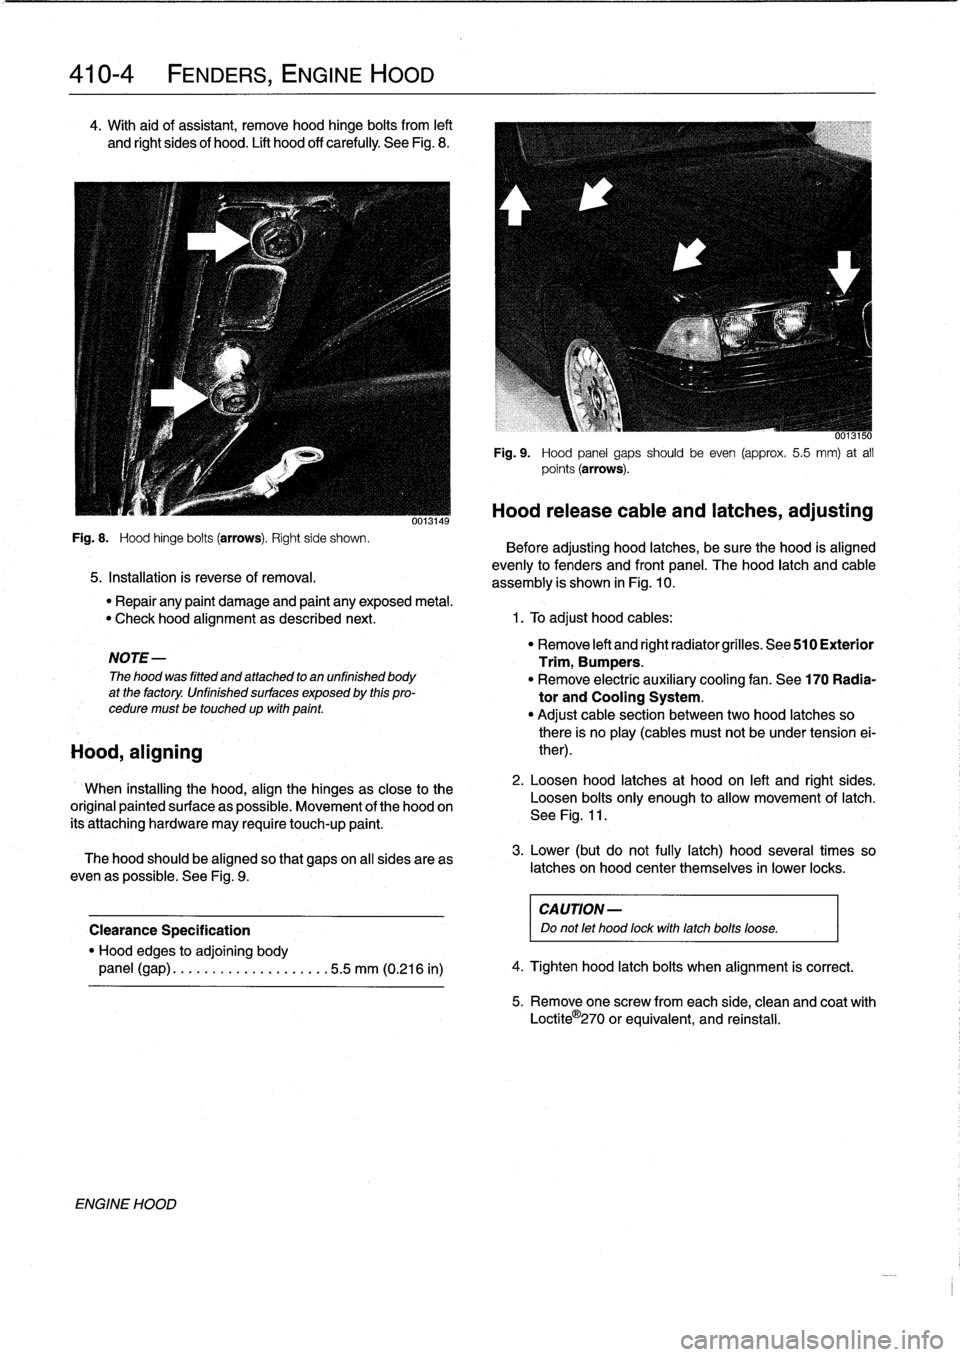 BMW 318i 1997 E36 Service Manual 
410-4

	

FENDERS,
ENGINE
HOOD

4
.
With
aid
of
assistant,
remove
hood
hinge
bolts
from
left

and
Rght
sides
of
hood
.
Lift
hood
off
carefully
See
Fig
.
8
.

Fig
.
8
.

	

Hood
hinge
bolts
(arrows)
.